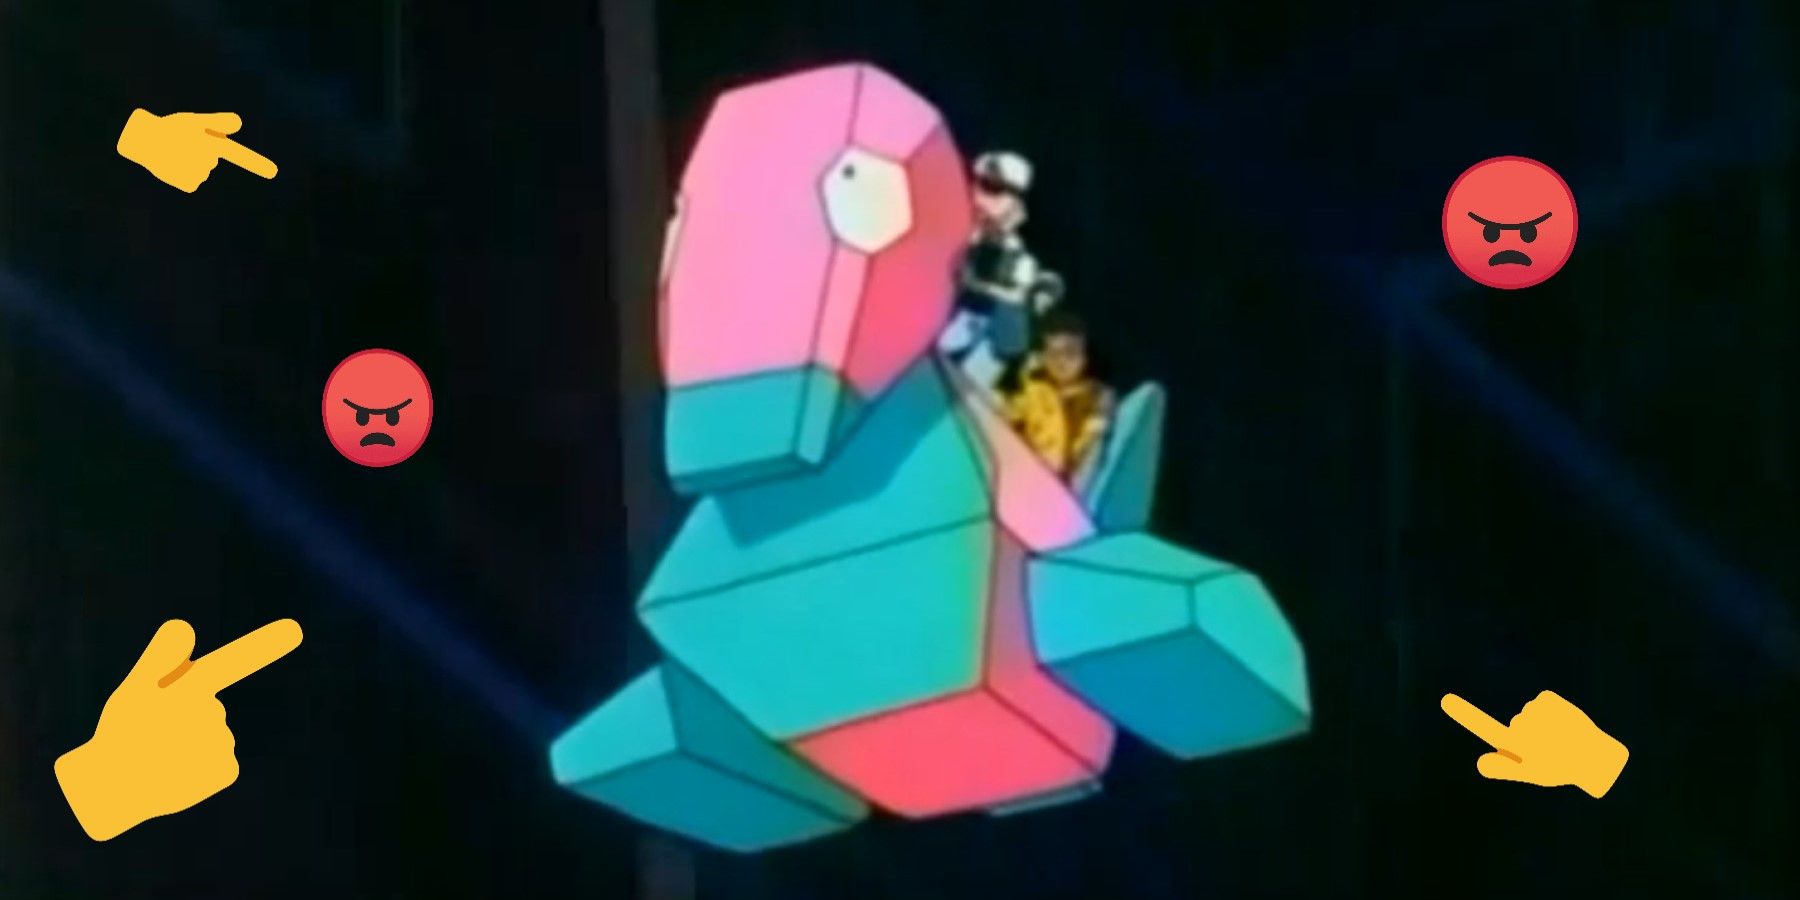 What Is Anime Dimming, and Why Is It Porygon's Fault? - Anime Corner